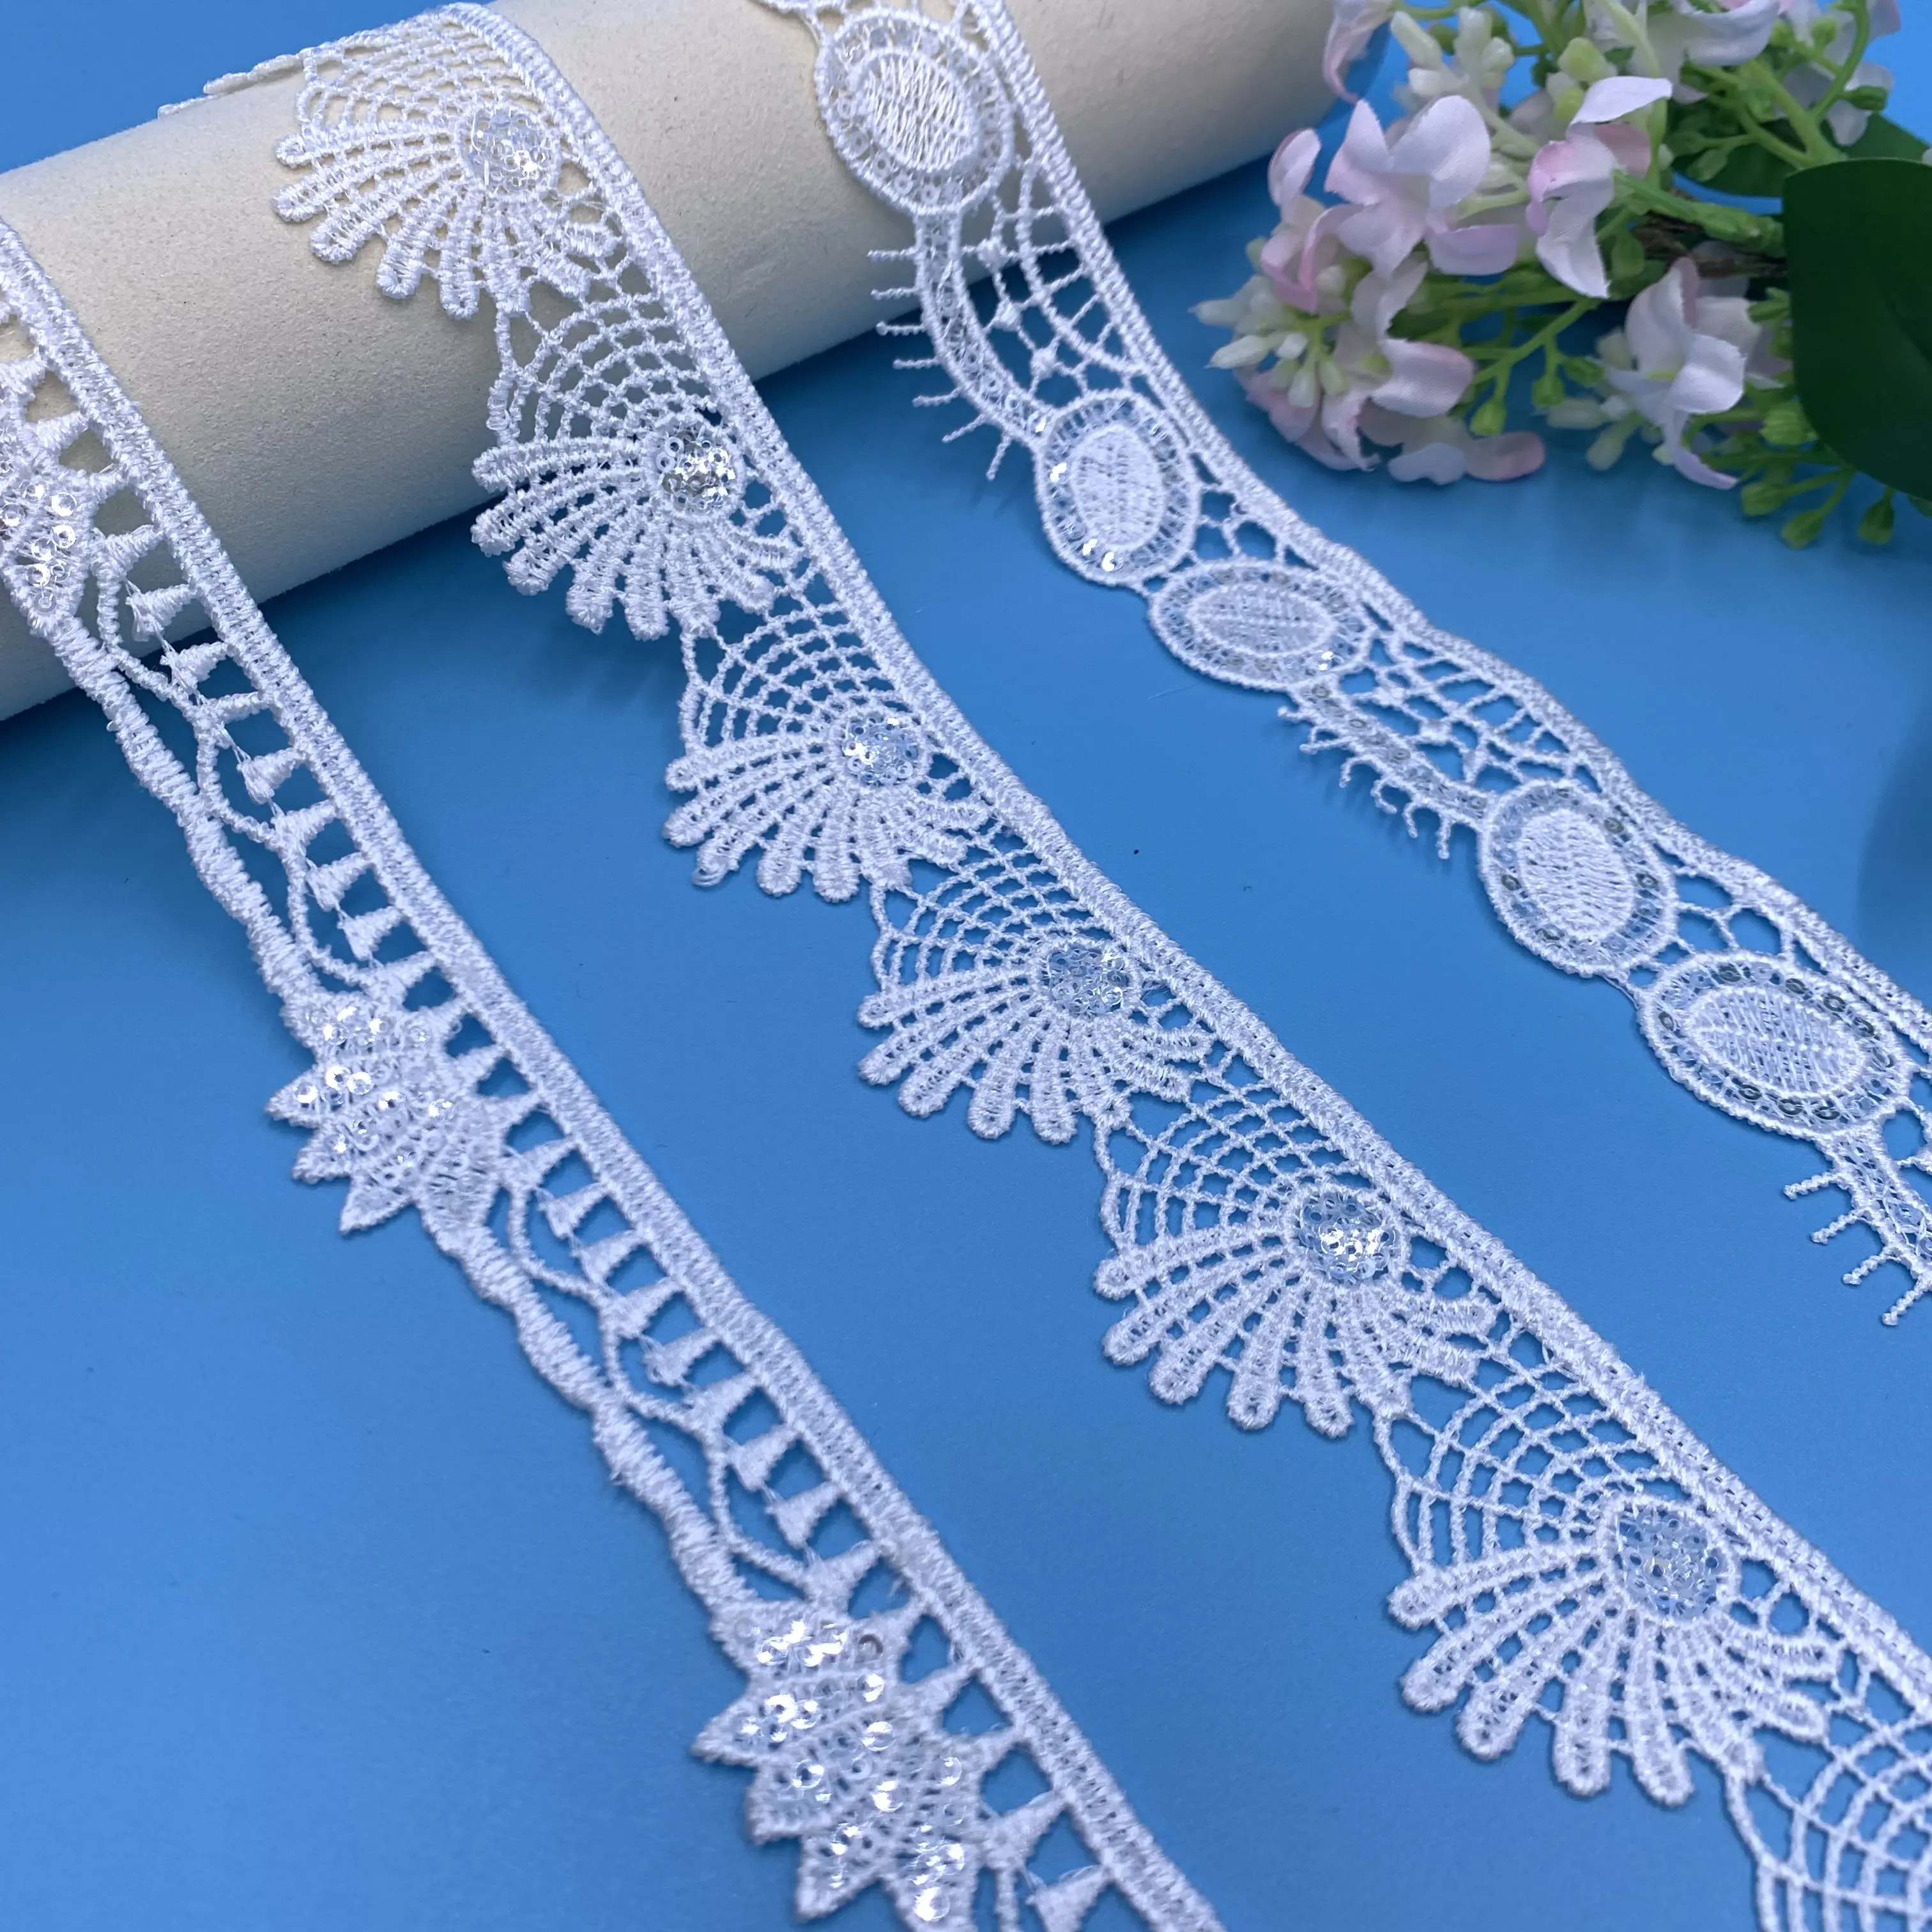 New Design Latest Pakistani Mesh Lace Fabric White Renda Sequin Water Soluble Embroidery Lace Fabric Trim